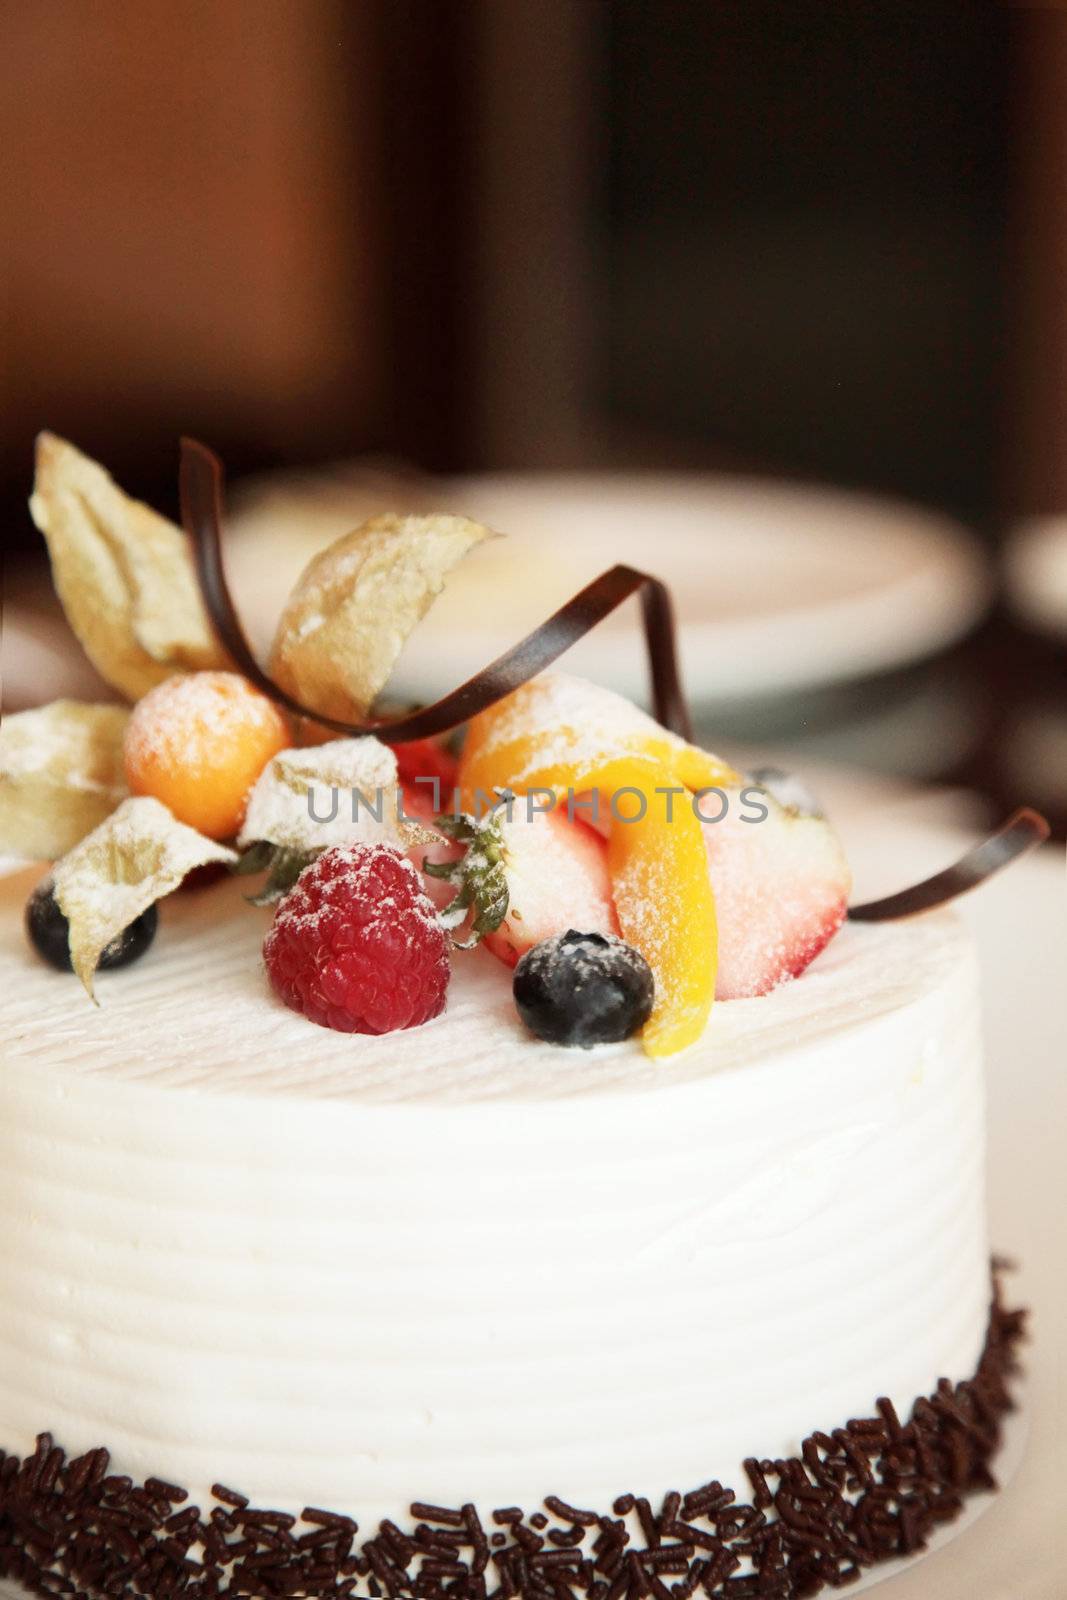 White Cream Icing Cake with Fruits and Chocolate